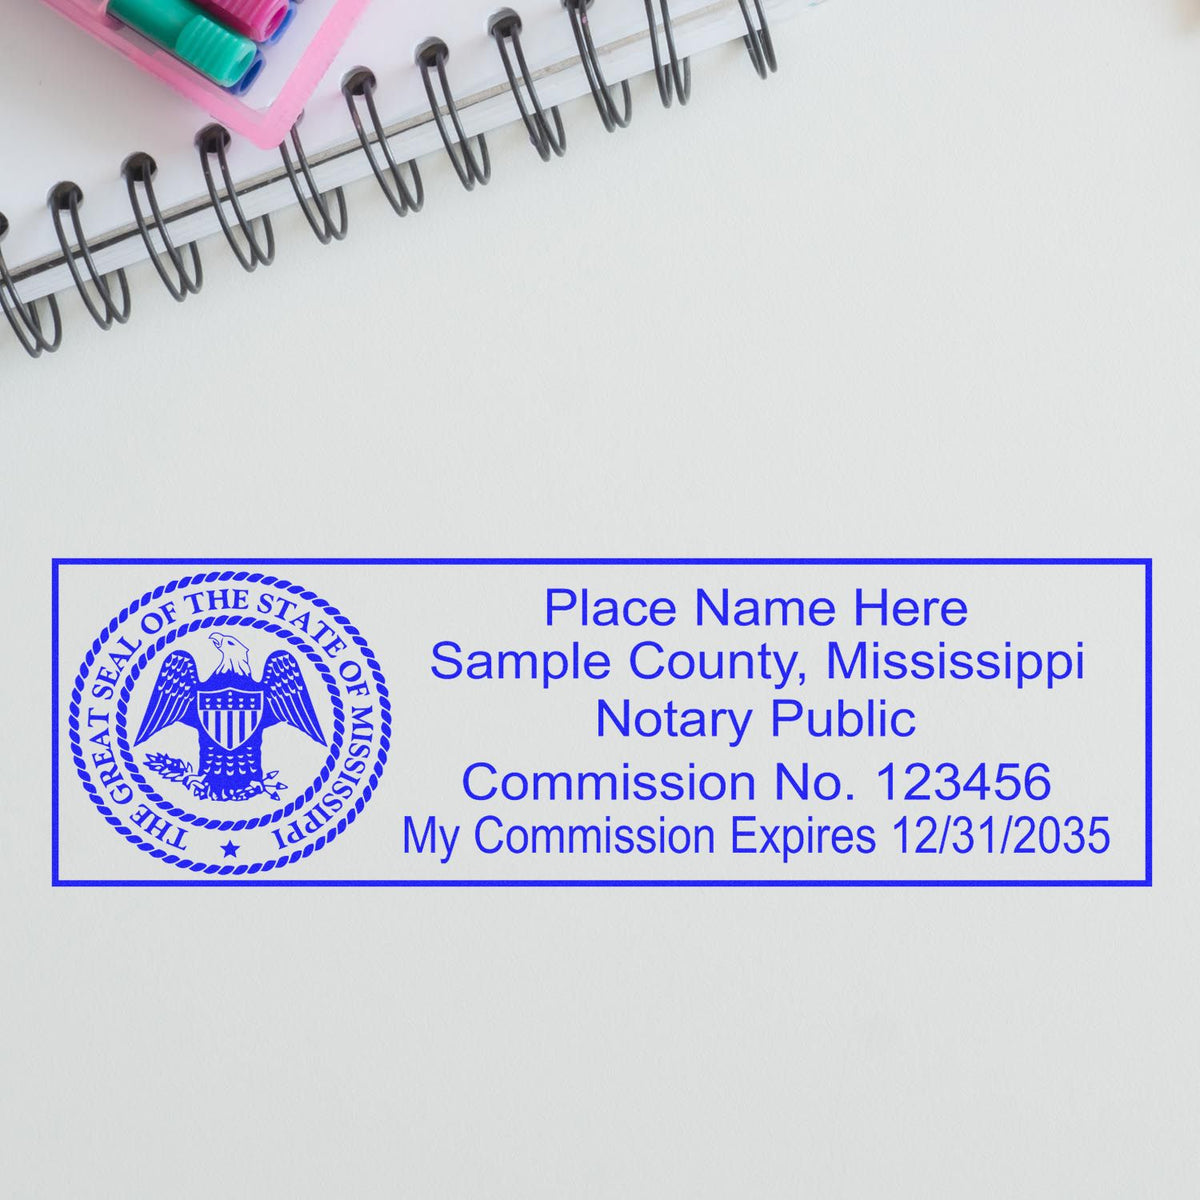 An alternative view of the Heavy-Duty Mississippi Rectangular Notary Stamp stamped on a sheet of paper showing the image in use